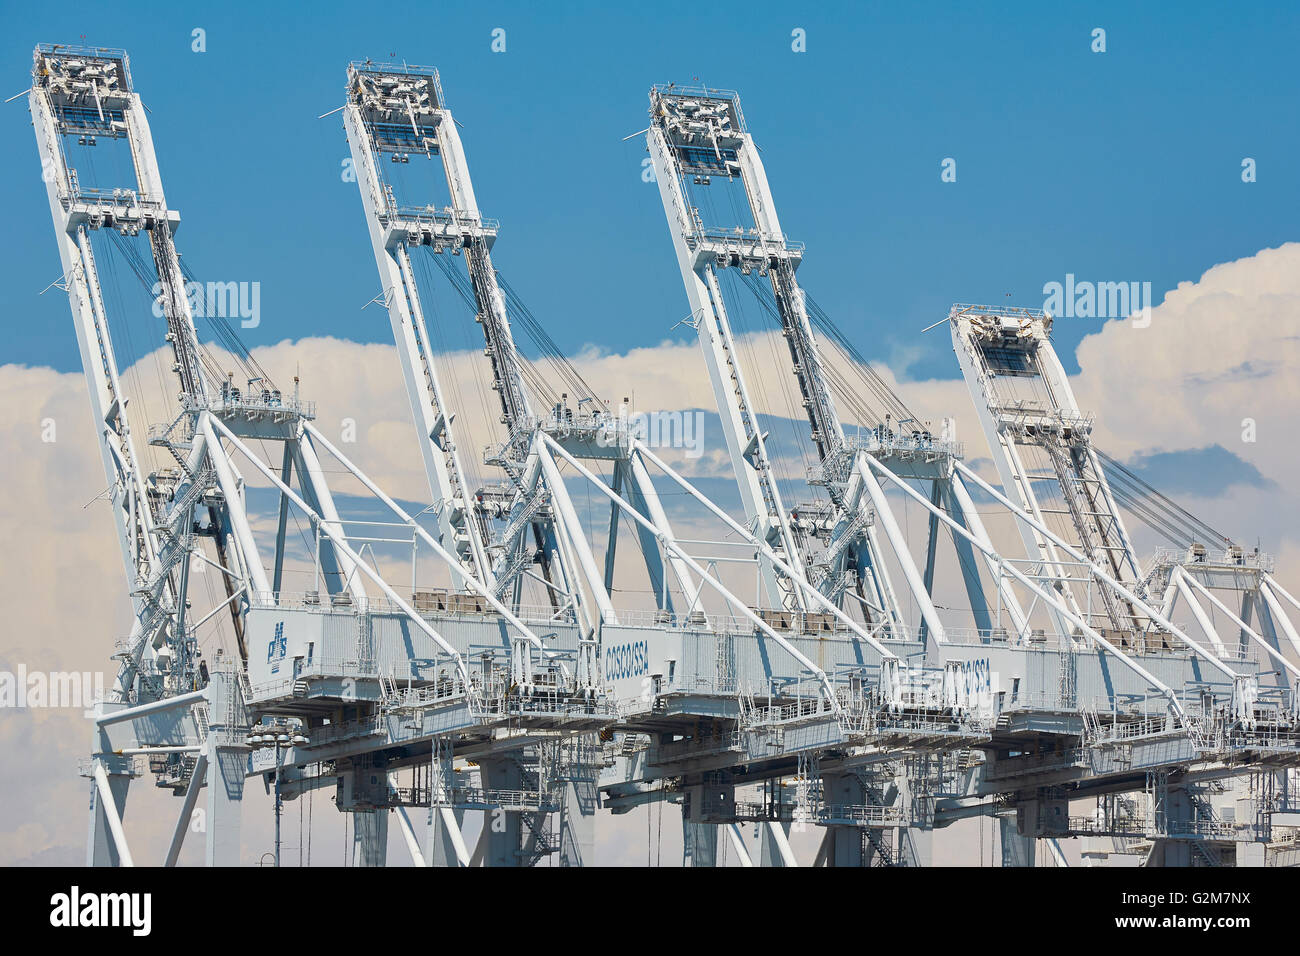 Shipping Container Cranes At Long Beach Container Terminal With Towering Cumulonimbus Storm Clouds In The Background. Stock Photo